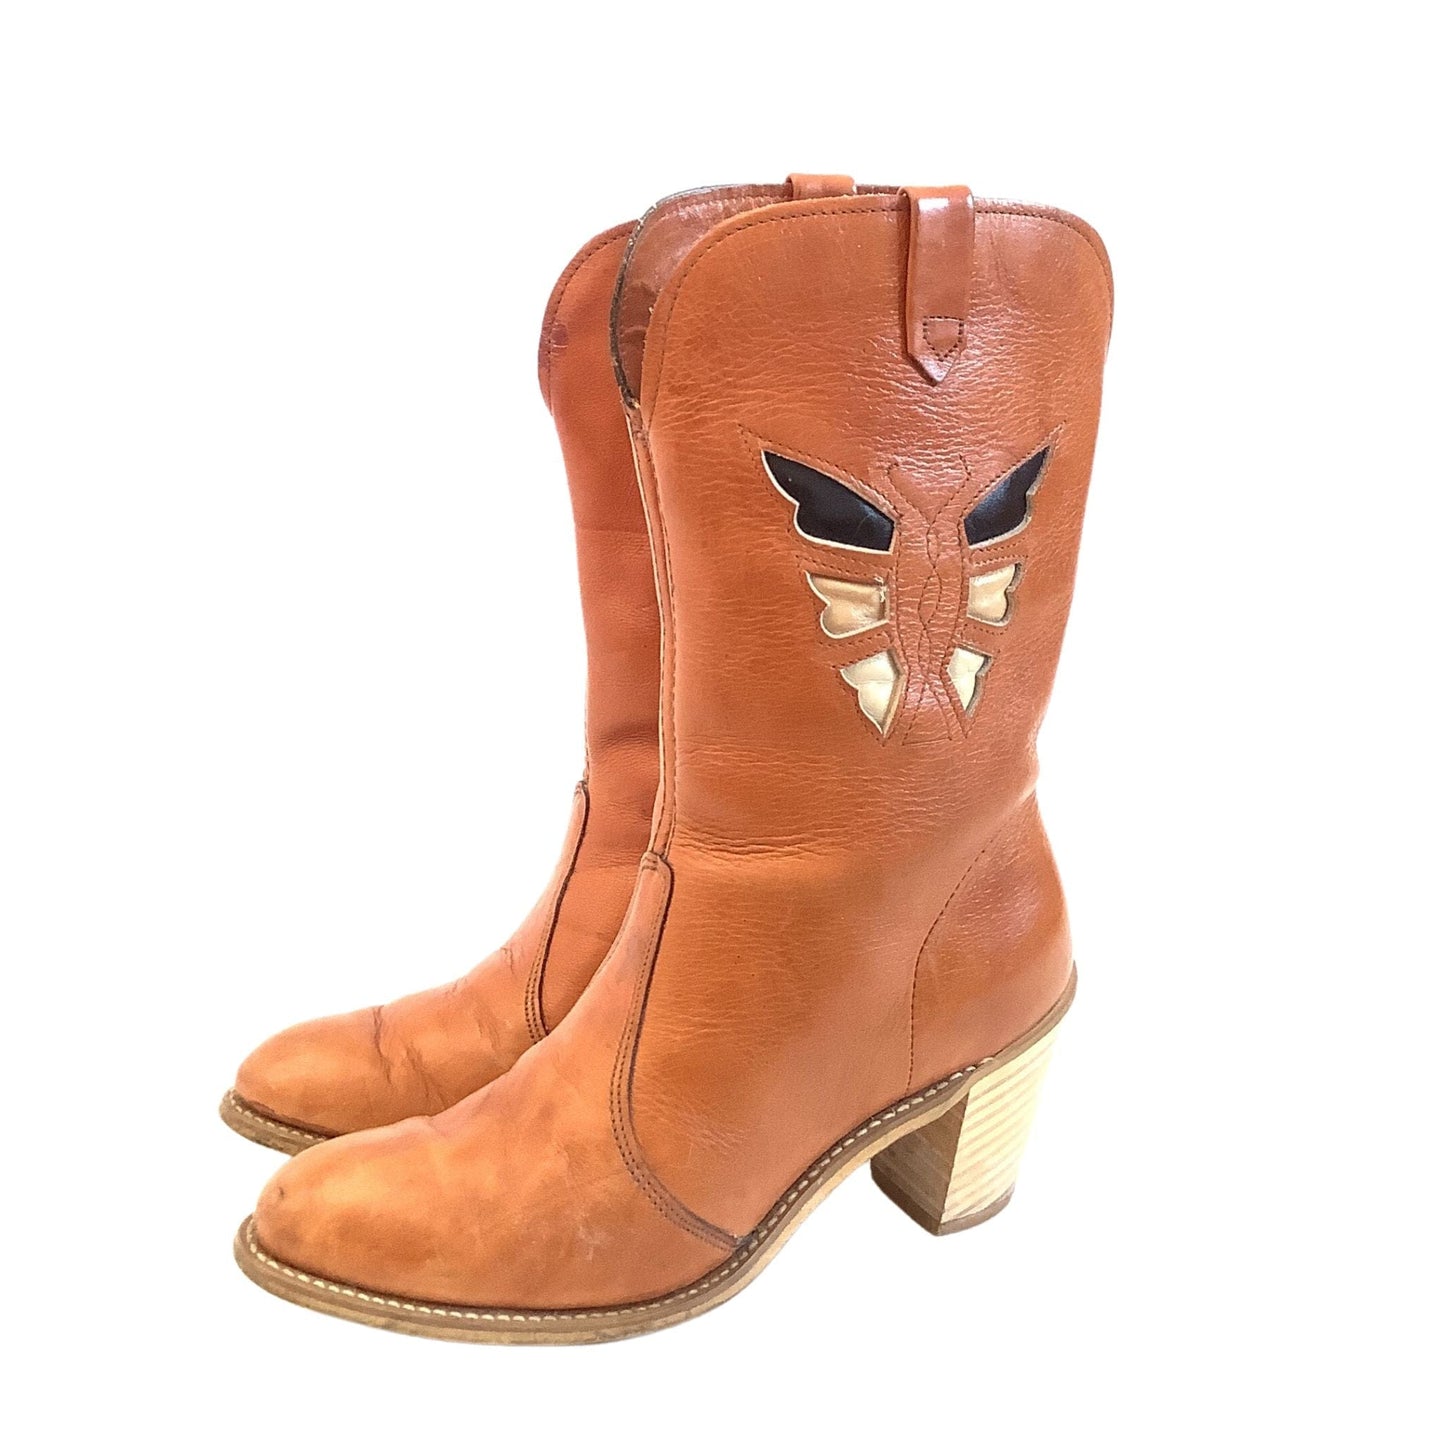 Dingo Butterfly Boots 7 / Tan / Vintage 1980s